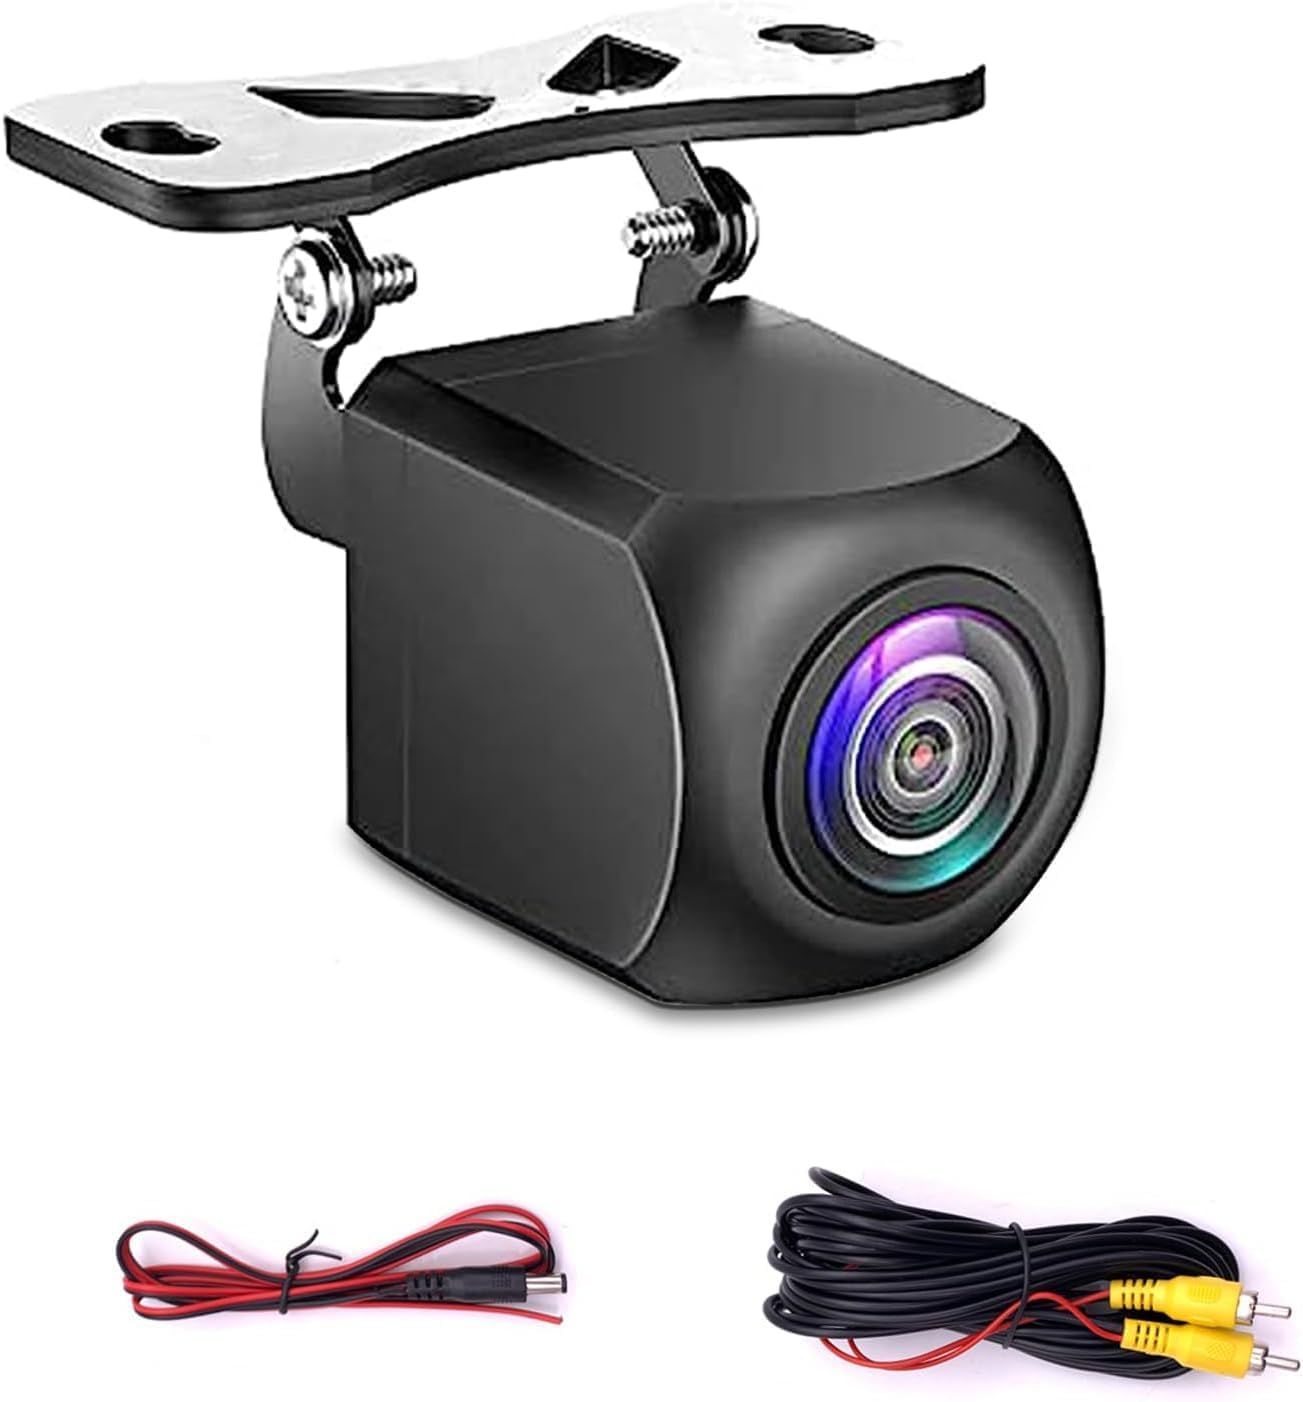 Devand 170° HD 1080P AHD Car Reverse Camera Fisheye latest super night vision function fisheye lens, Parking Assistance, IP68 Waterproof, Night Vision for All Car